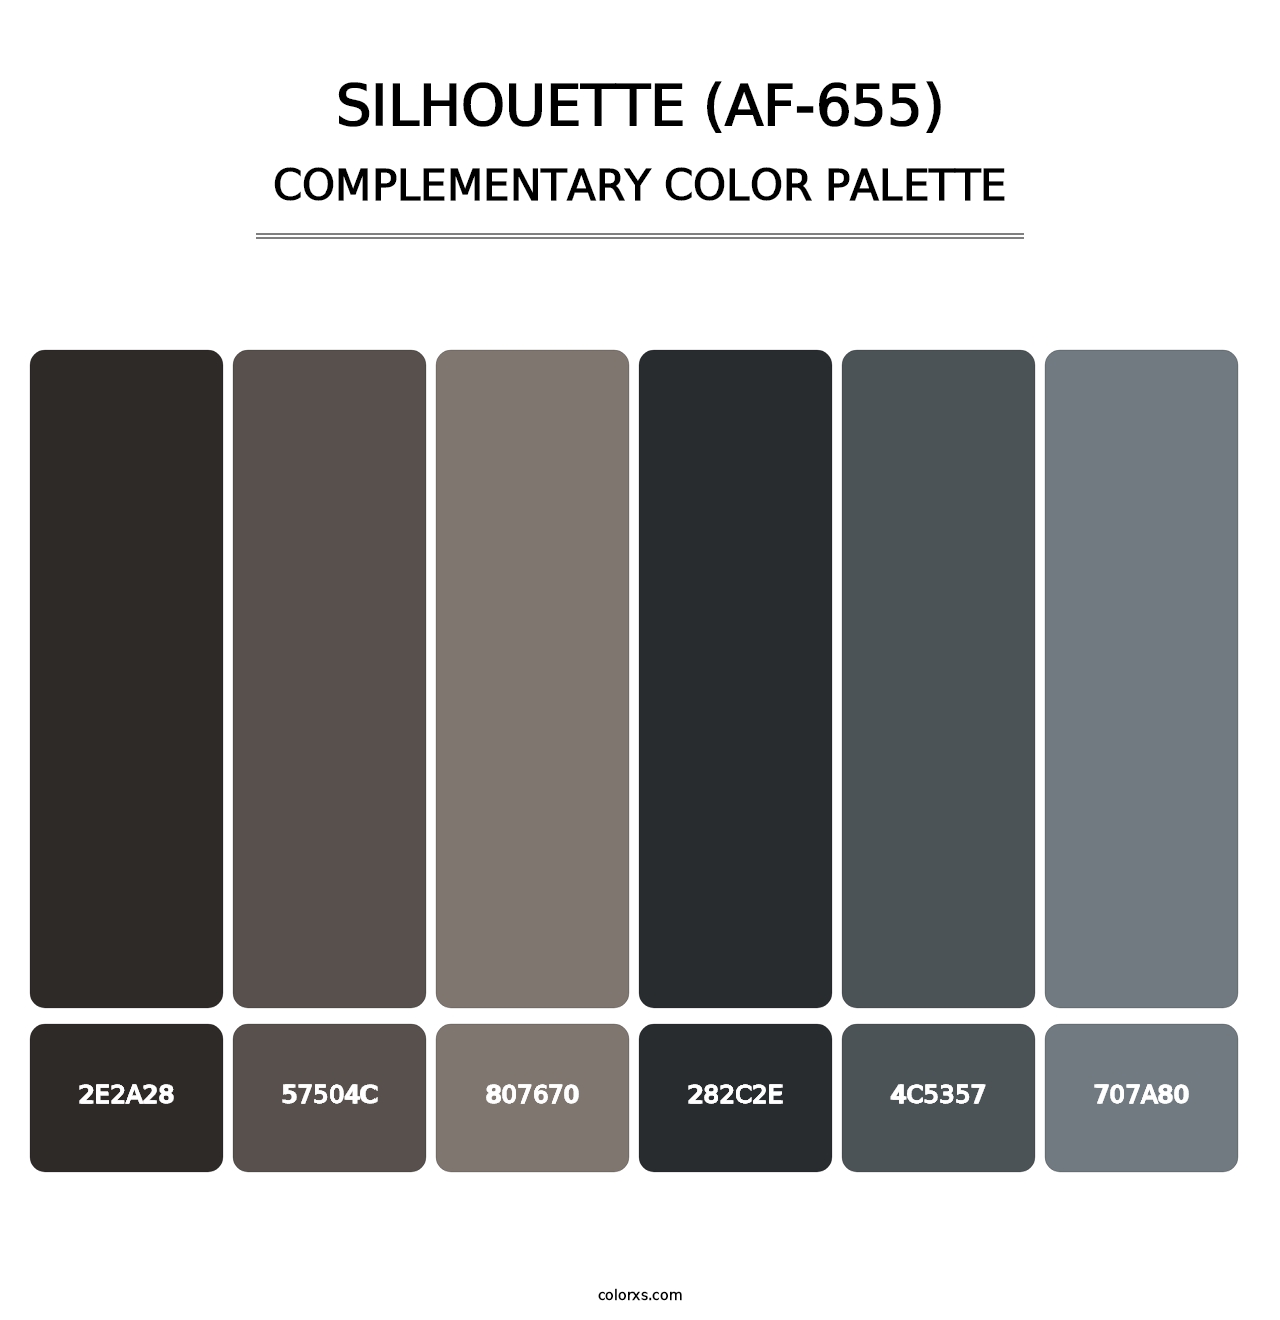 Silhouette (AF-655) - Complementary Color Palette